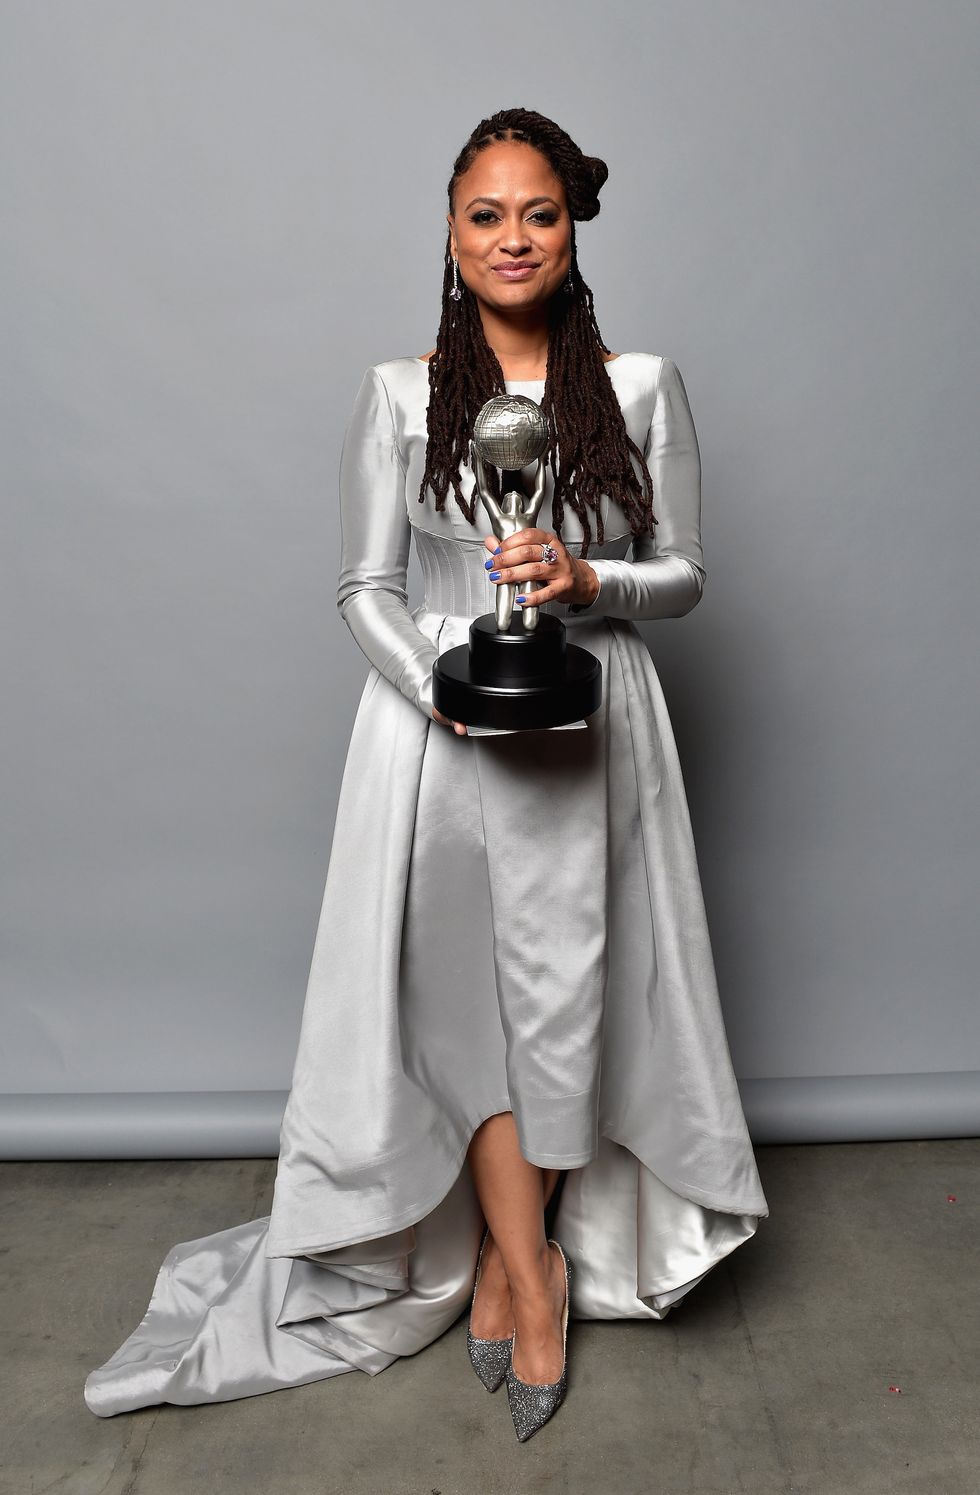 Ava DuVernay poses for a portrait at the 46th NAACP Image Awards